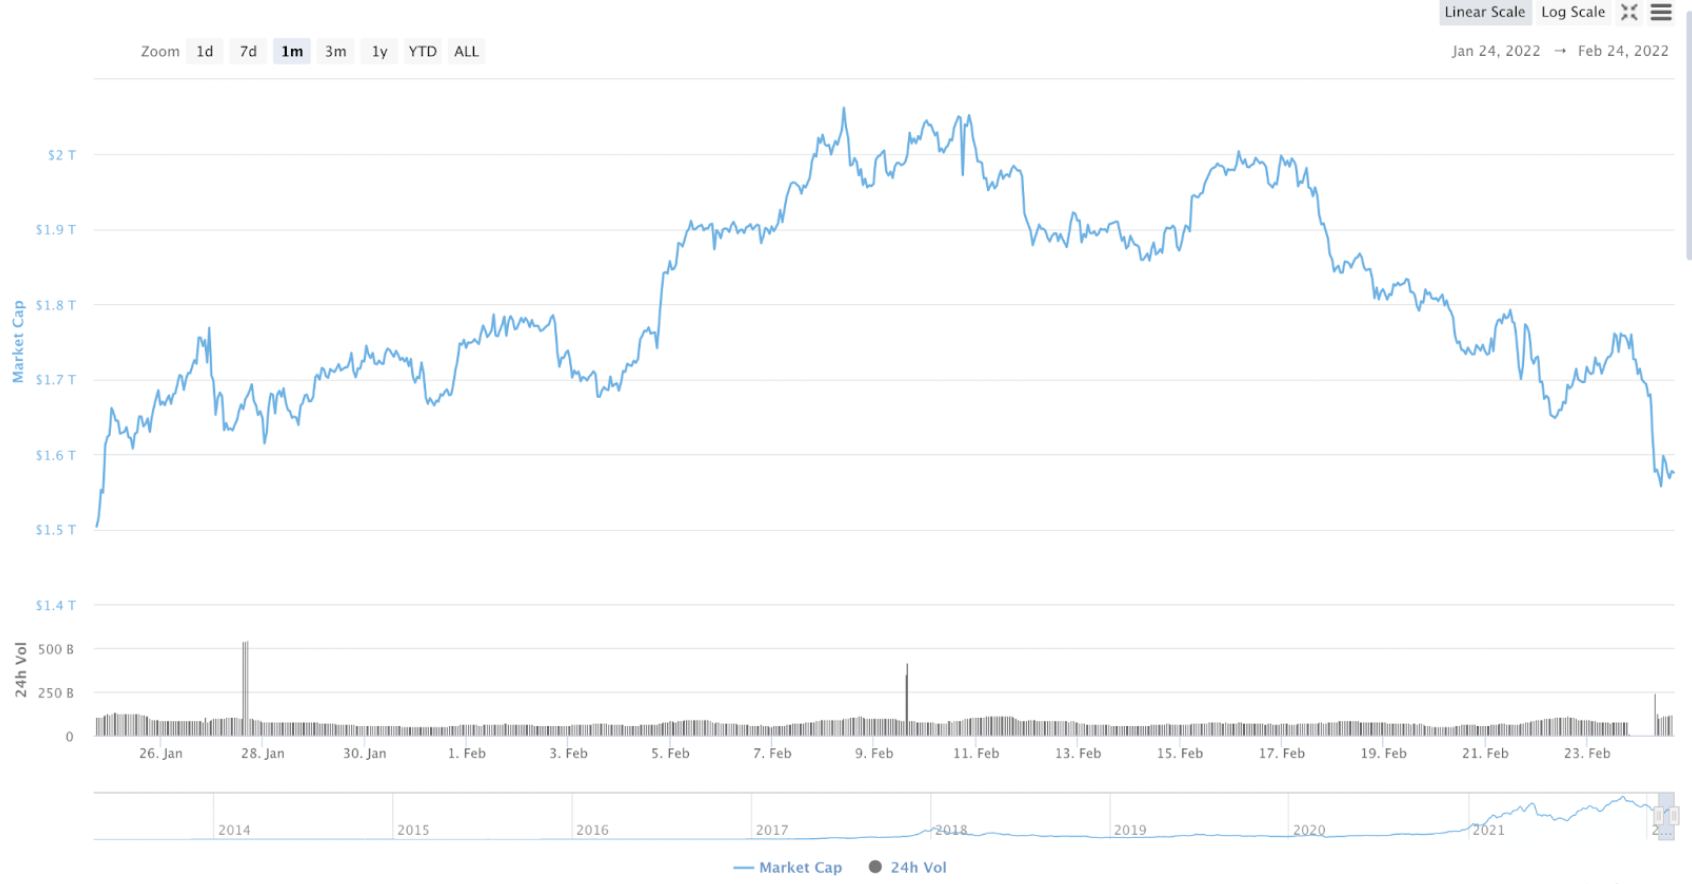 Cryptocurrency market cap chart from CoinMarketCap (Jan 24 2022 - Feb 24 2022)